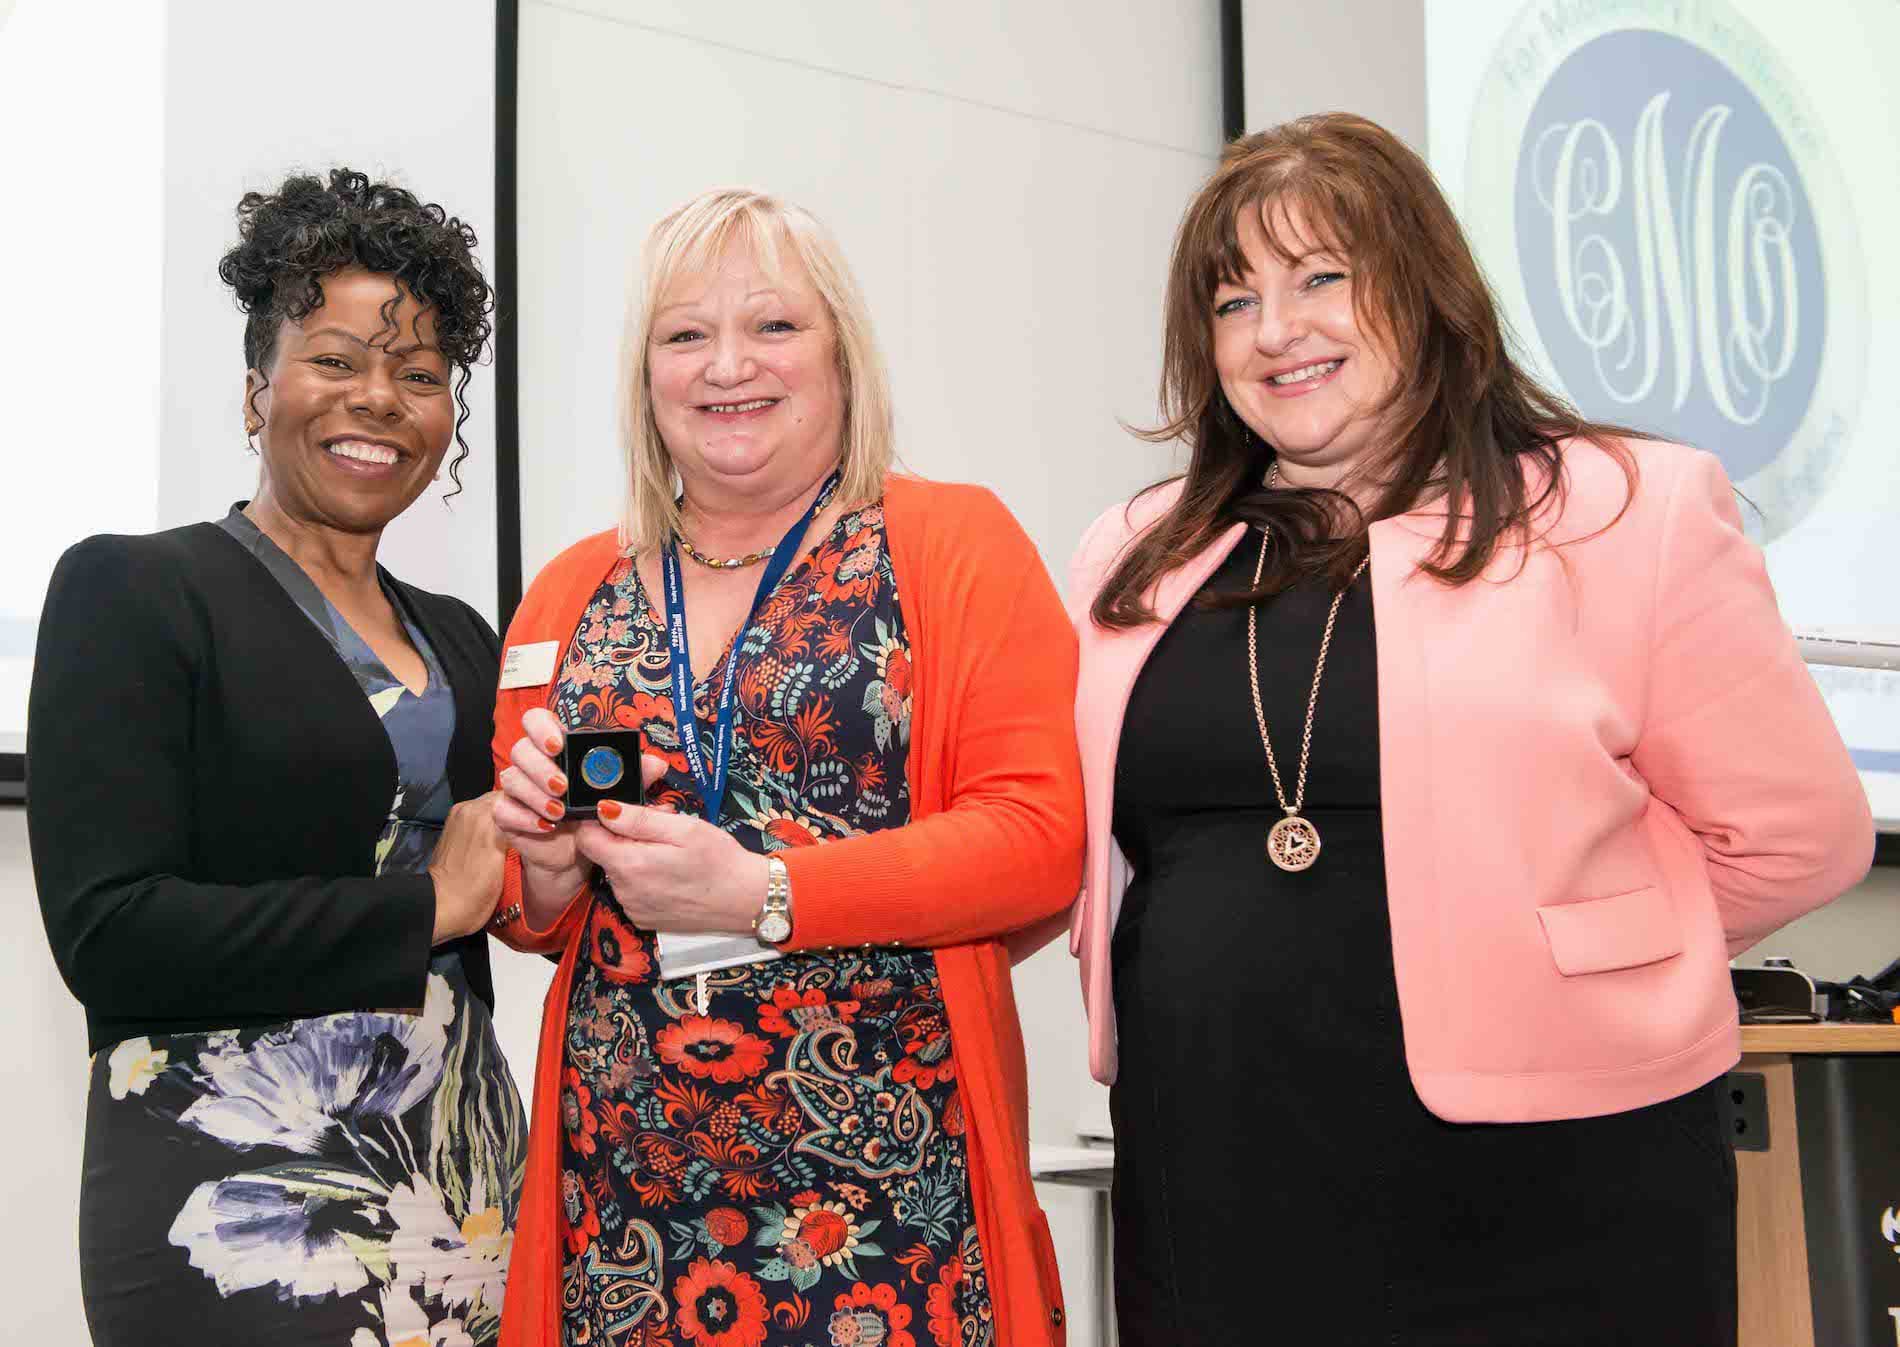 Prof Dunkley-Bent OBE awarding Nicky Clark the Gold Chief Midwifery Officer Award